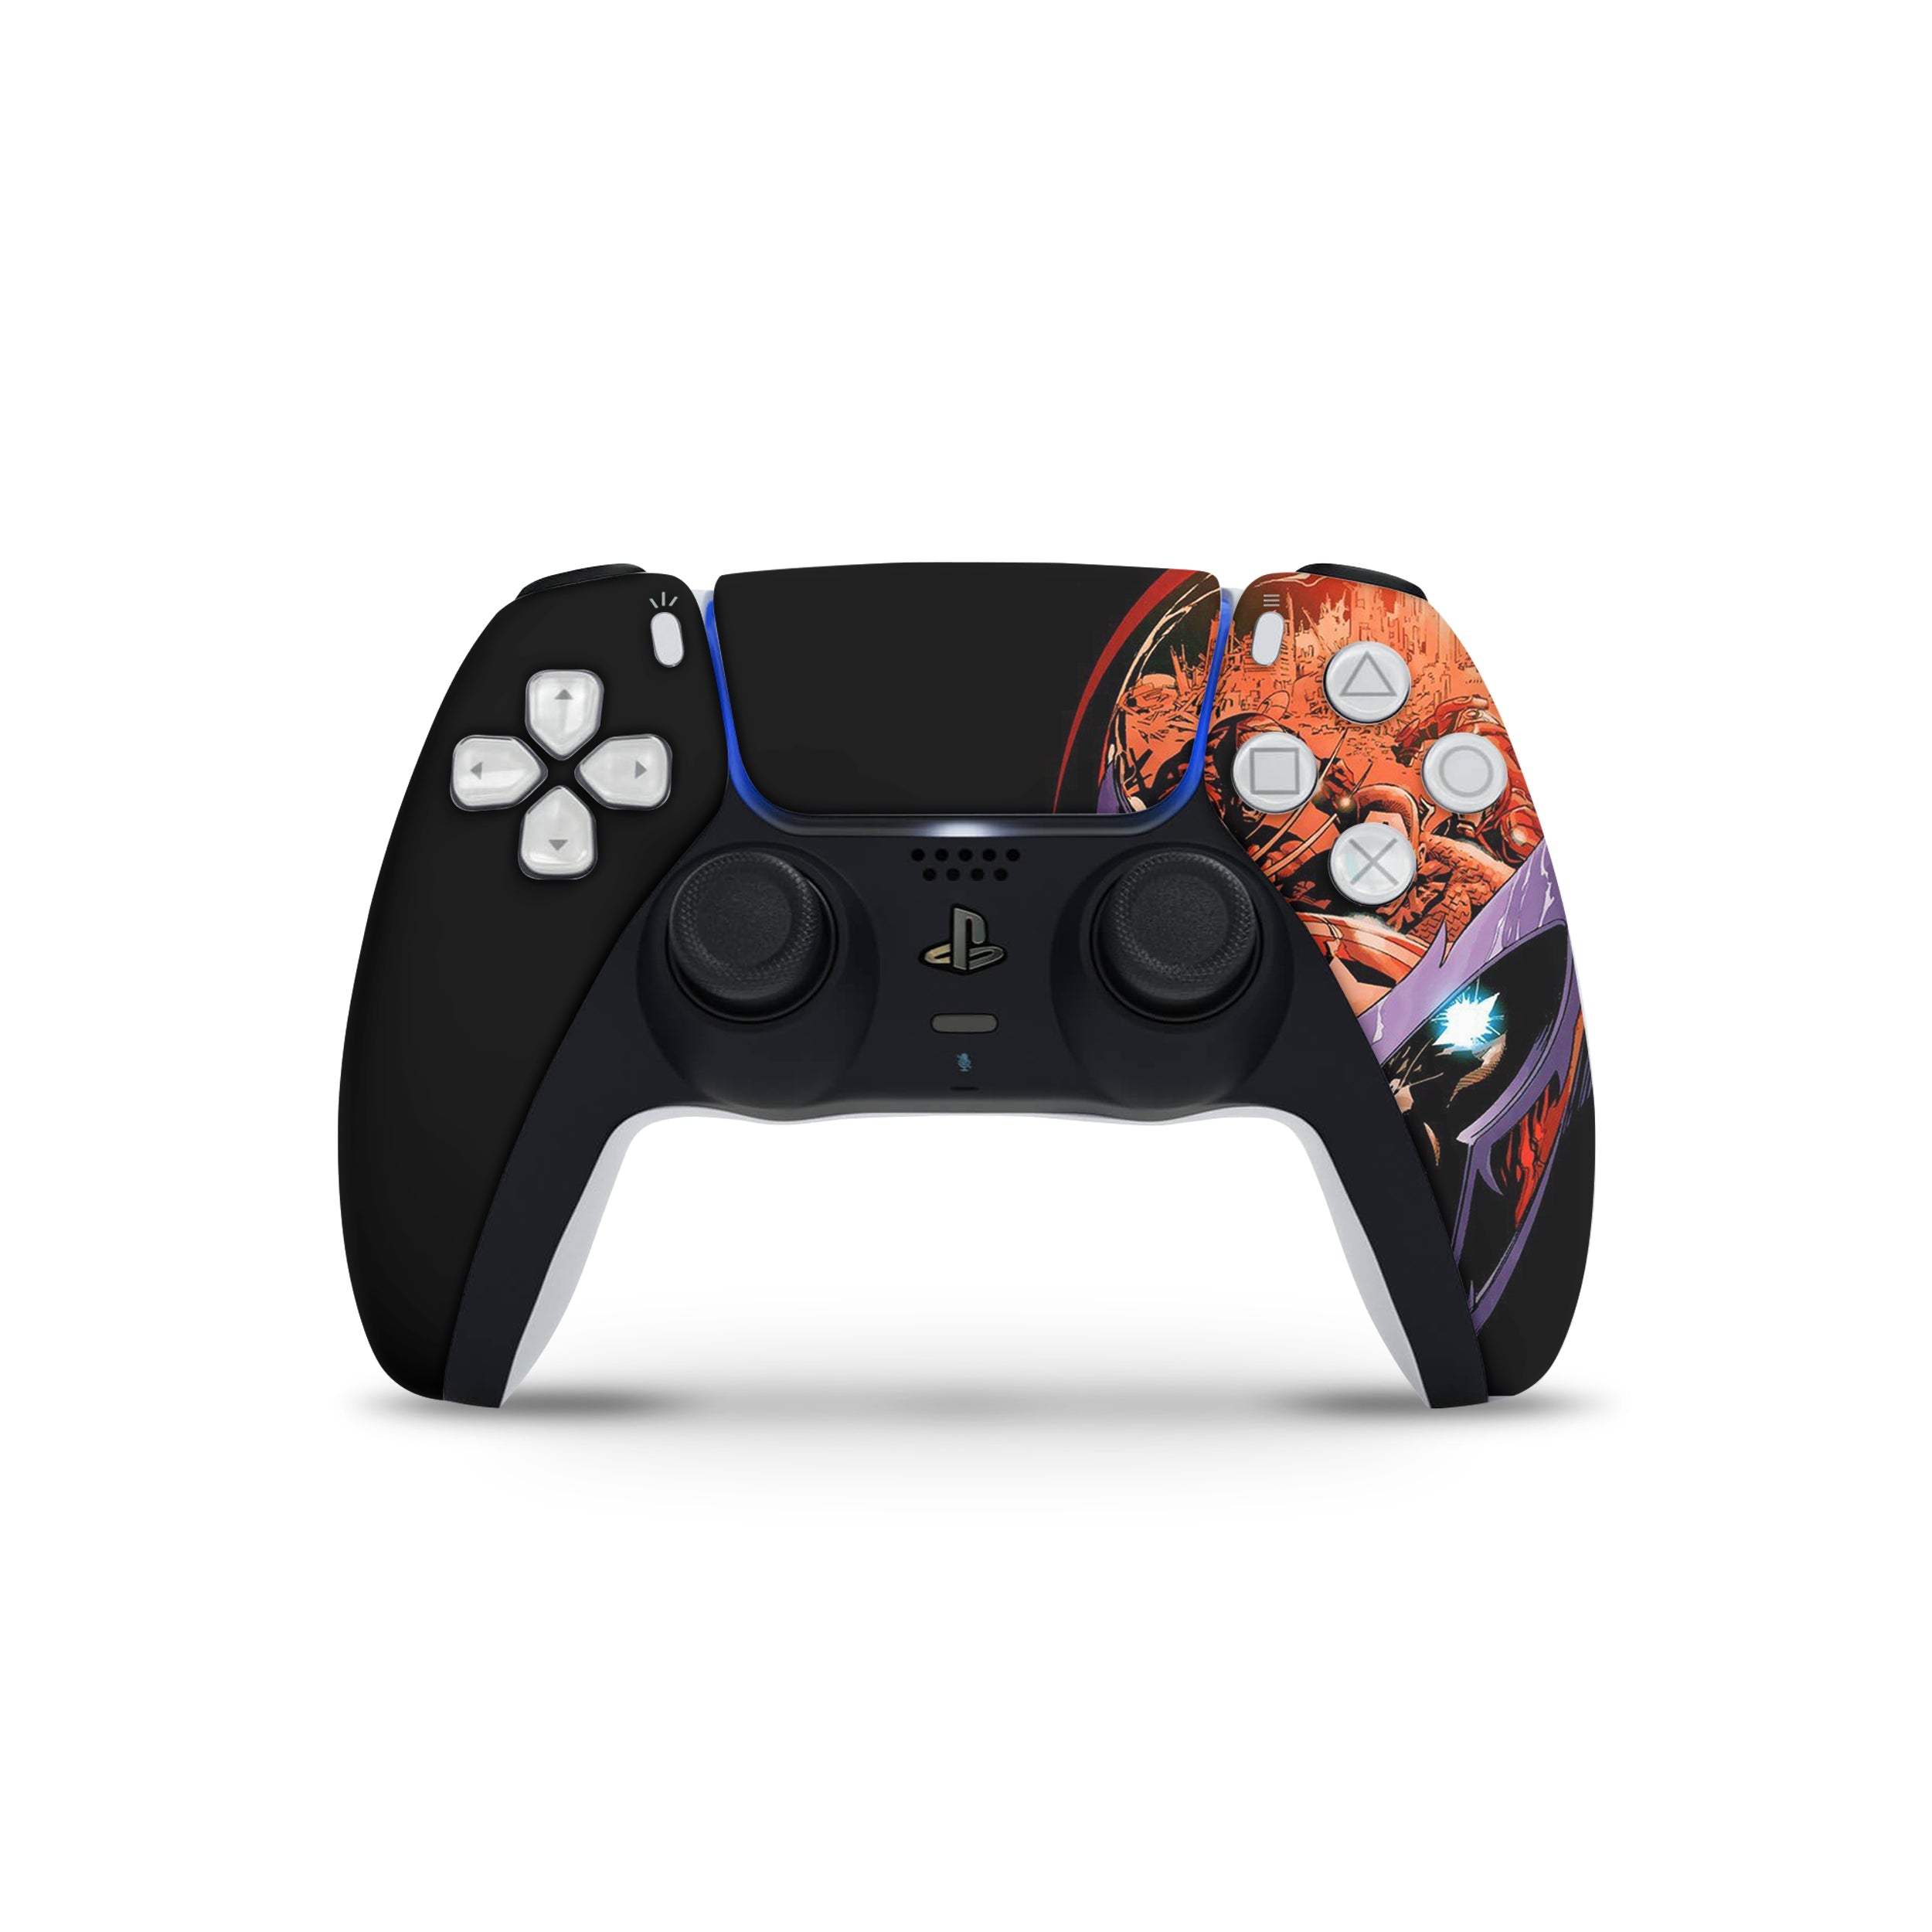 A video game skin featuring a Marvel X Men Magneto design for the PS5 DualSense Controller.